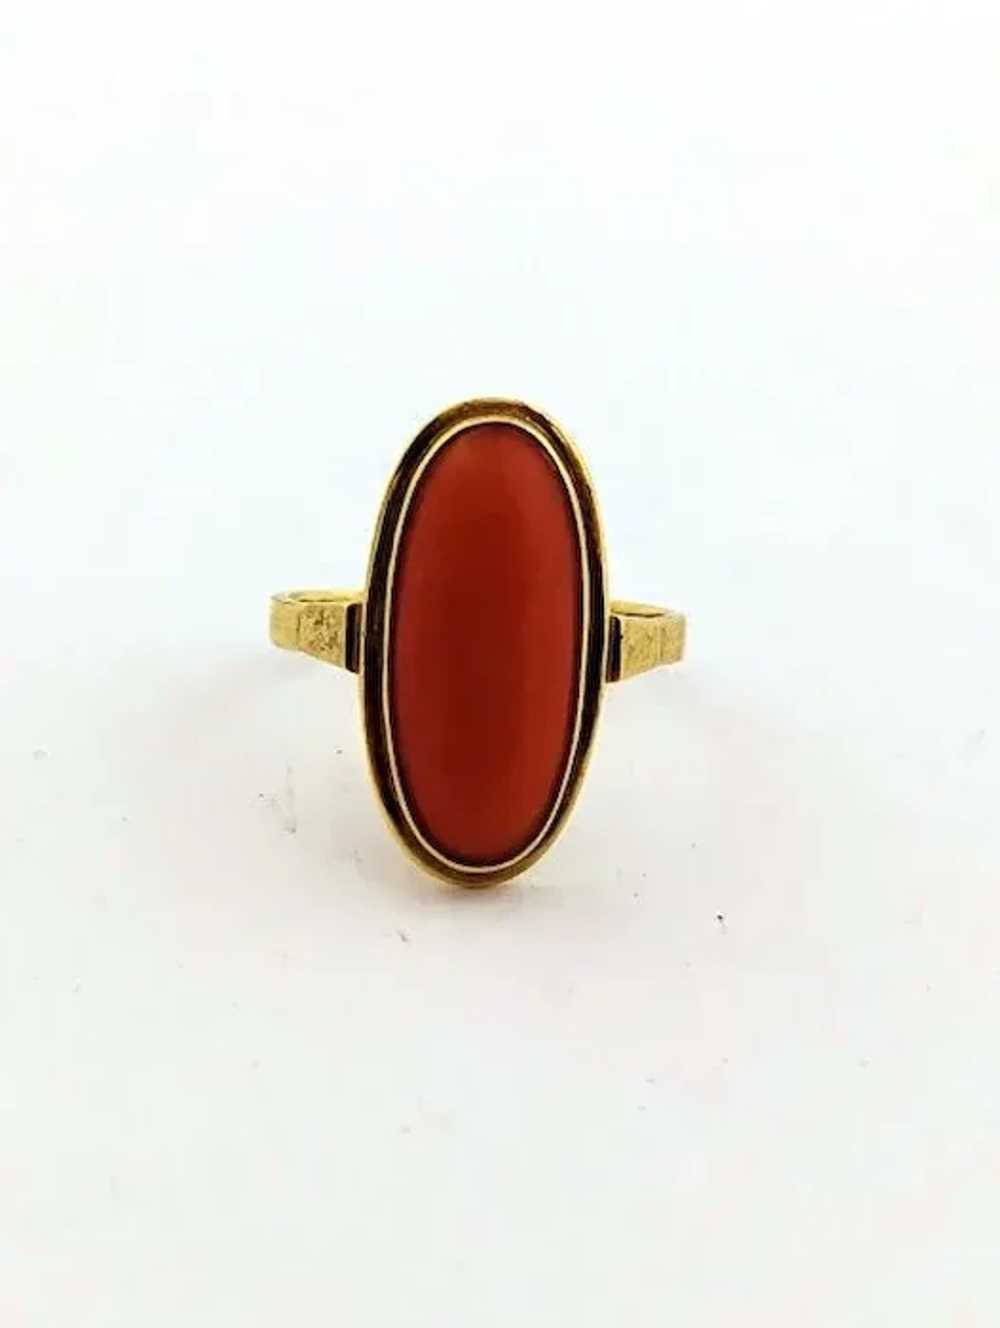 Fabulous Antique 8K Gold Genuine Red Coral Ring - image 9